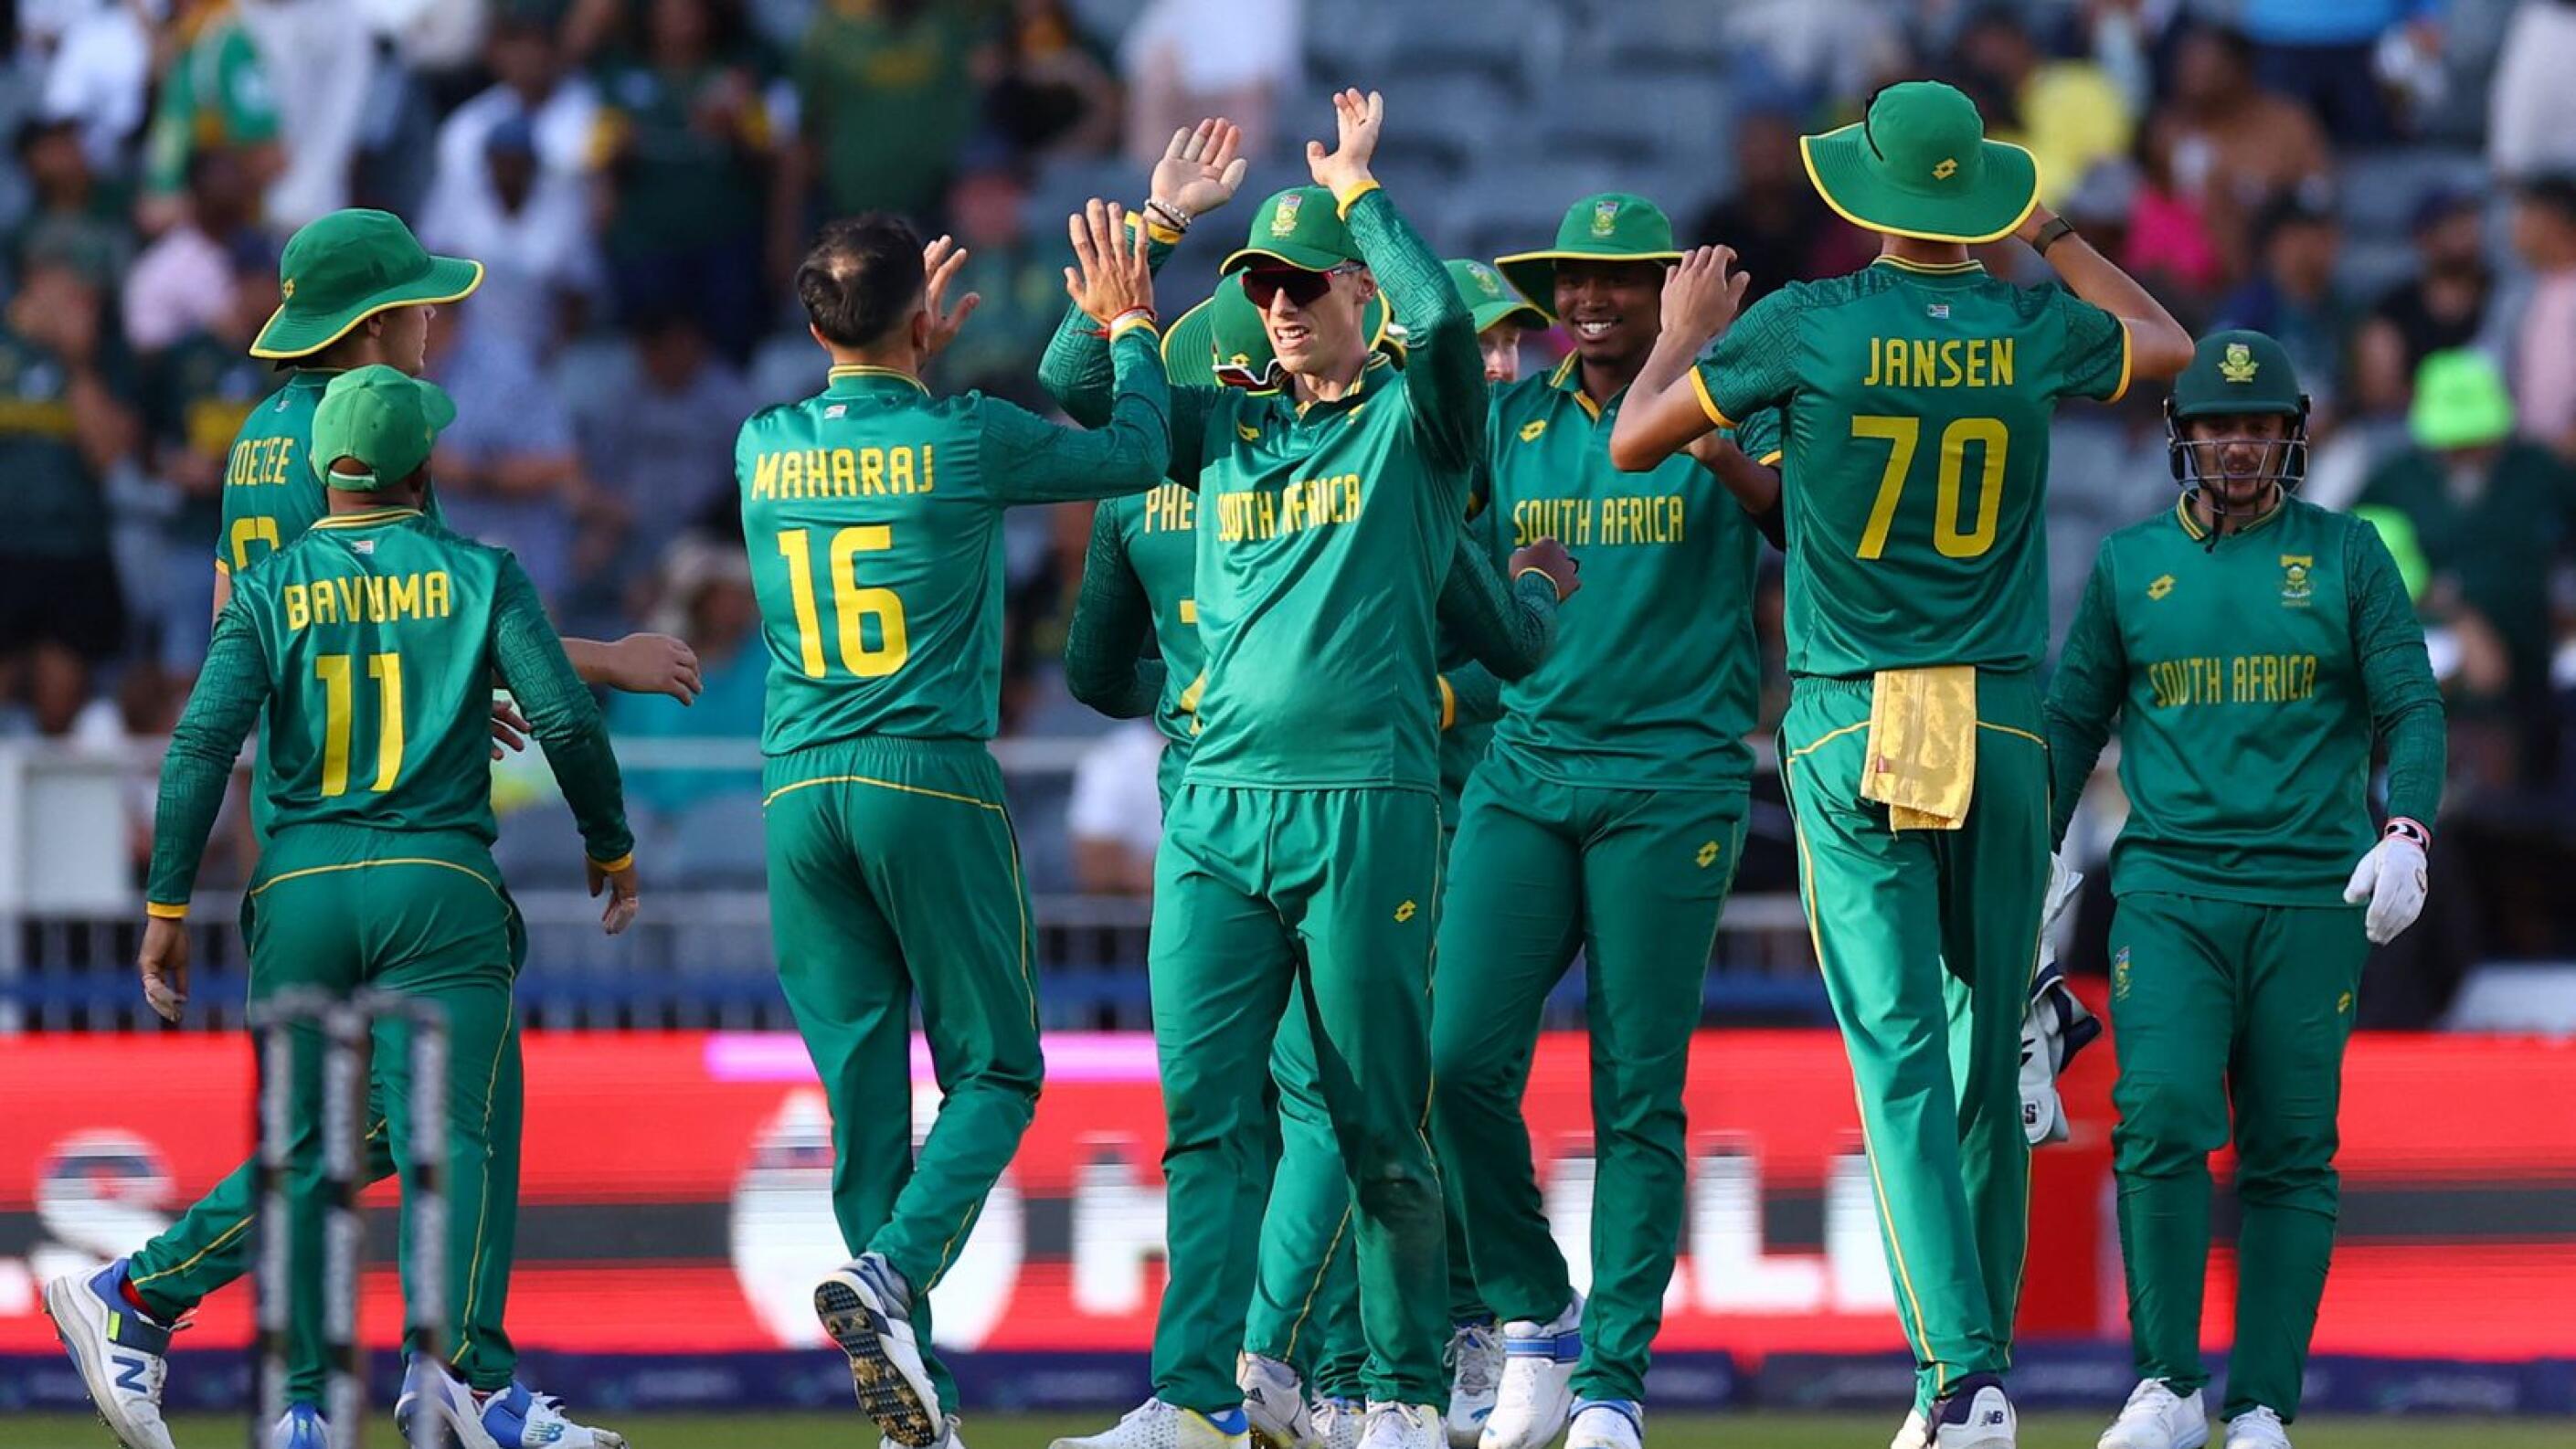 Proteas players celebrate a wicket 